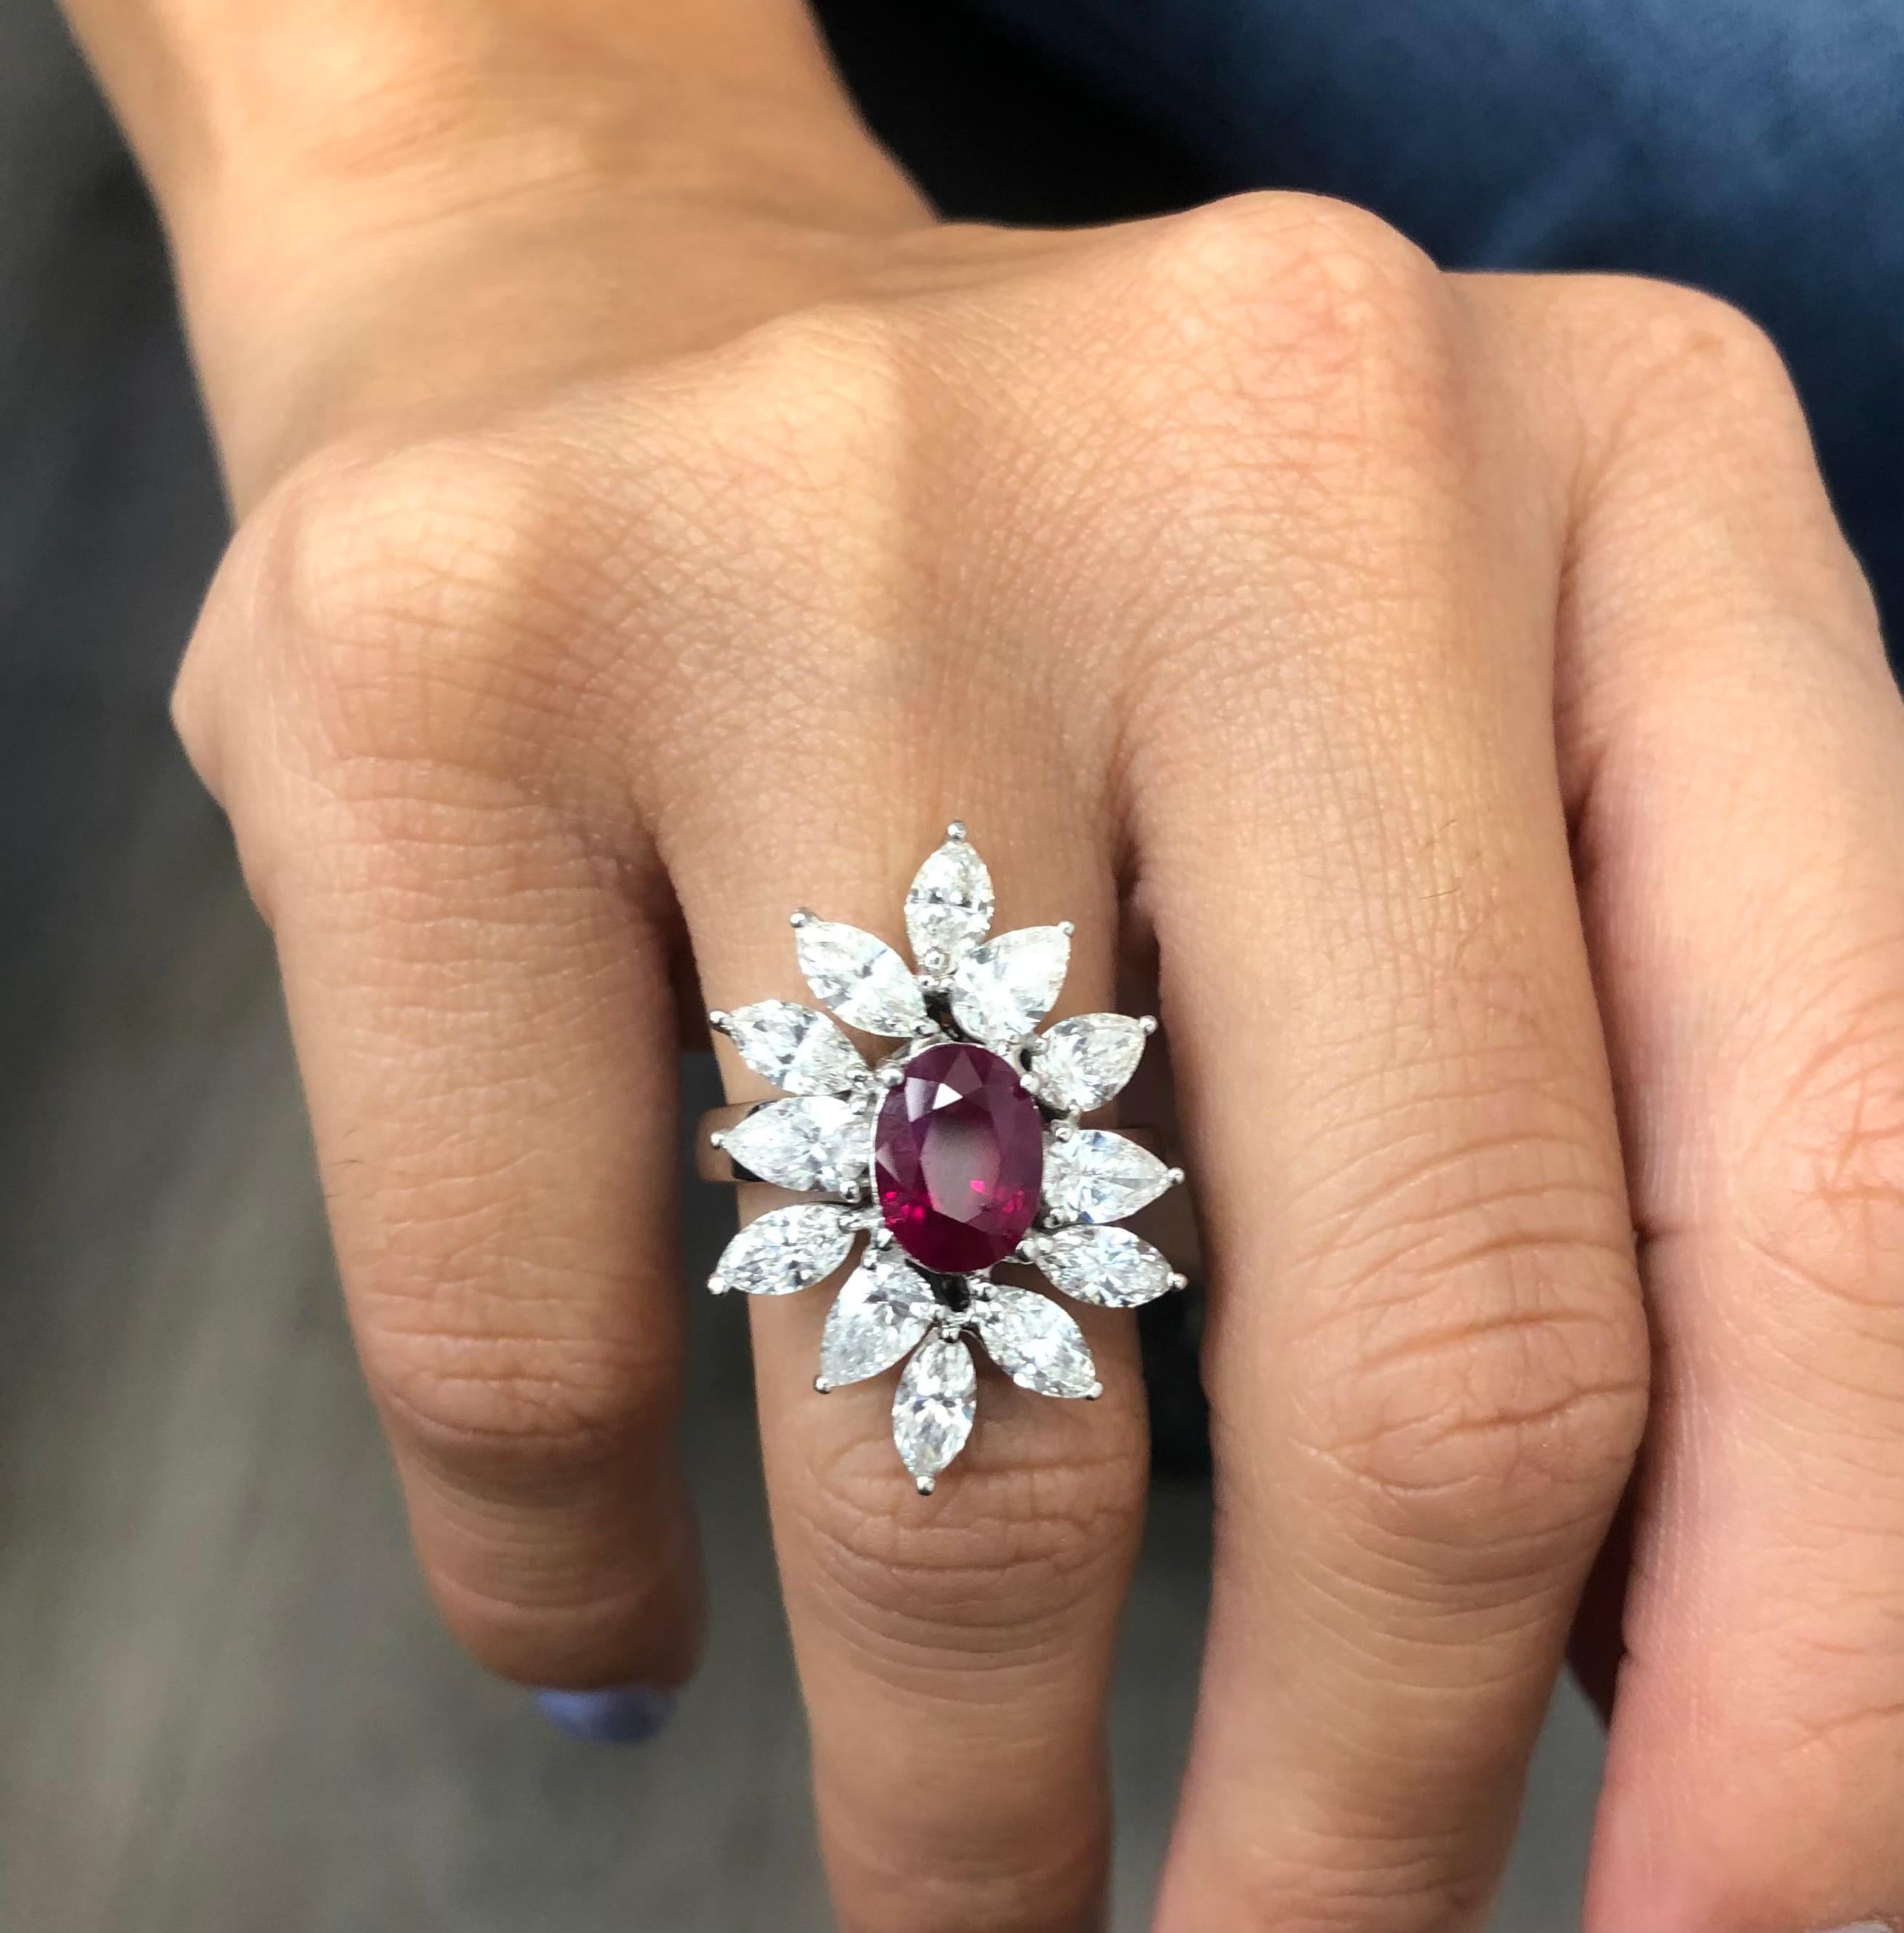 Gorgeous ring crafted in 18k white gold. This ring is real show stopper. The highlight of the ring is one 3.06 ct. oval shape natural ruby gemstone showing pigeon blood Burma ruby color. The ruby is vibrant as it is accompanied with a GRS laboratory